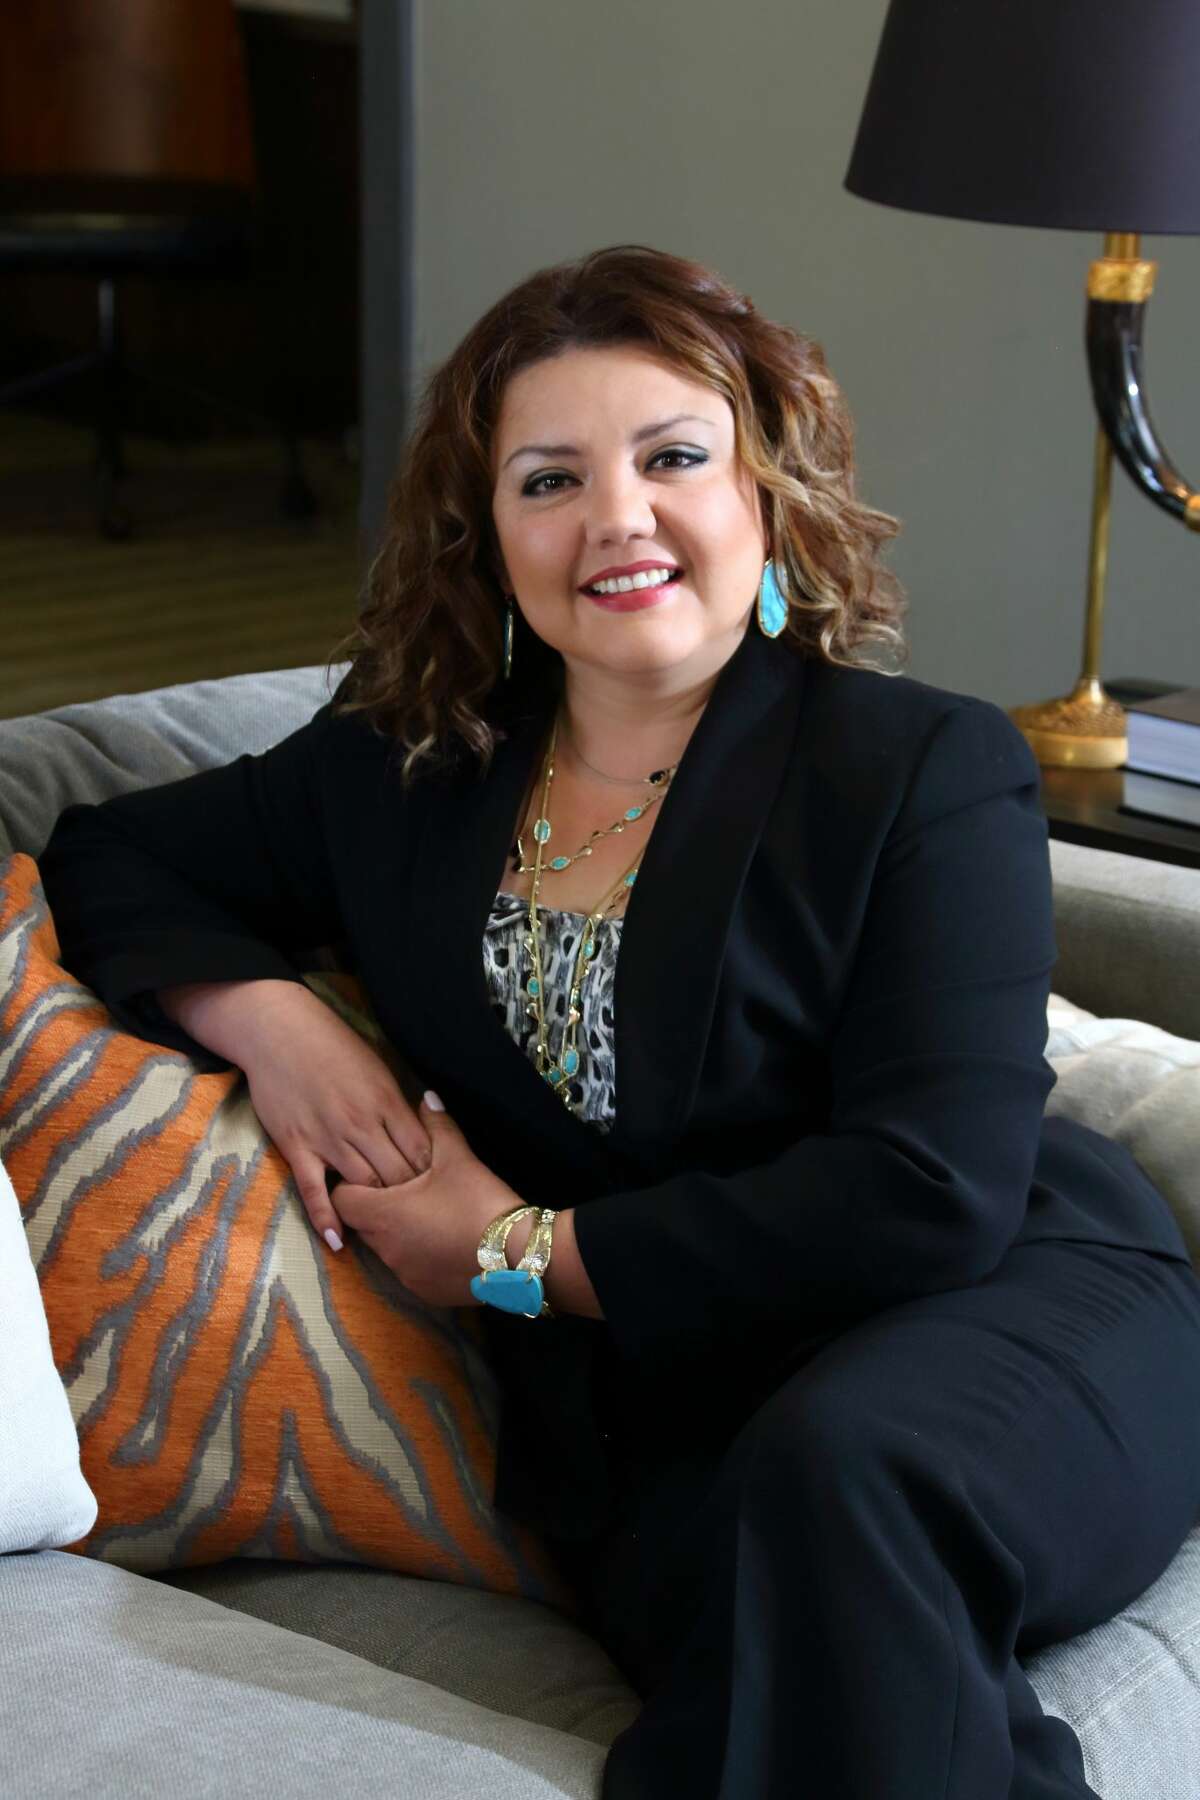 At age 17, Juanita Mendoza began working in the proof department at Wells Fargo’s Lubbock location, working her way up into roles of teller, personal banker, store manager and now, vice president.